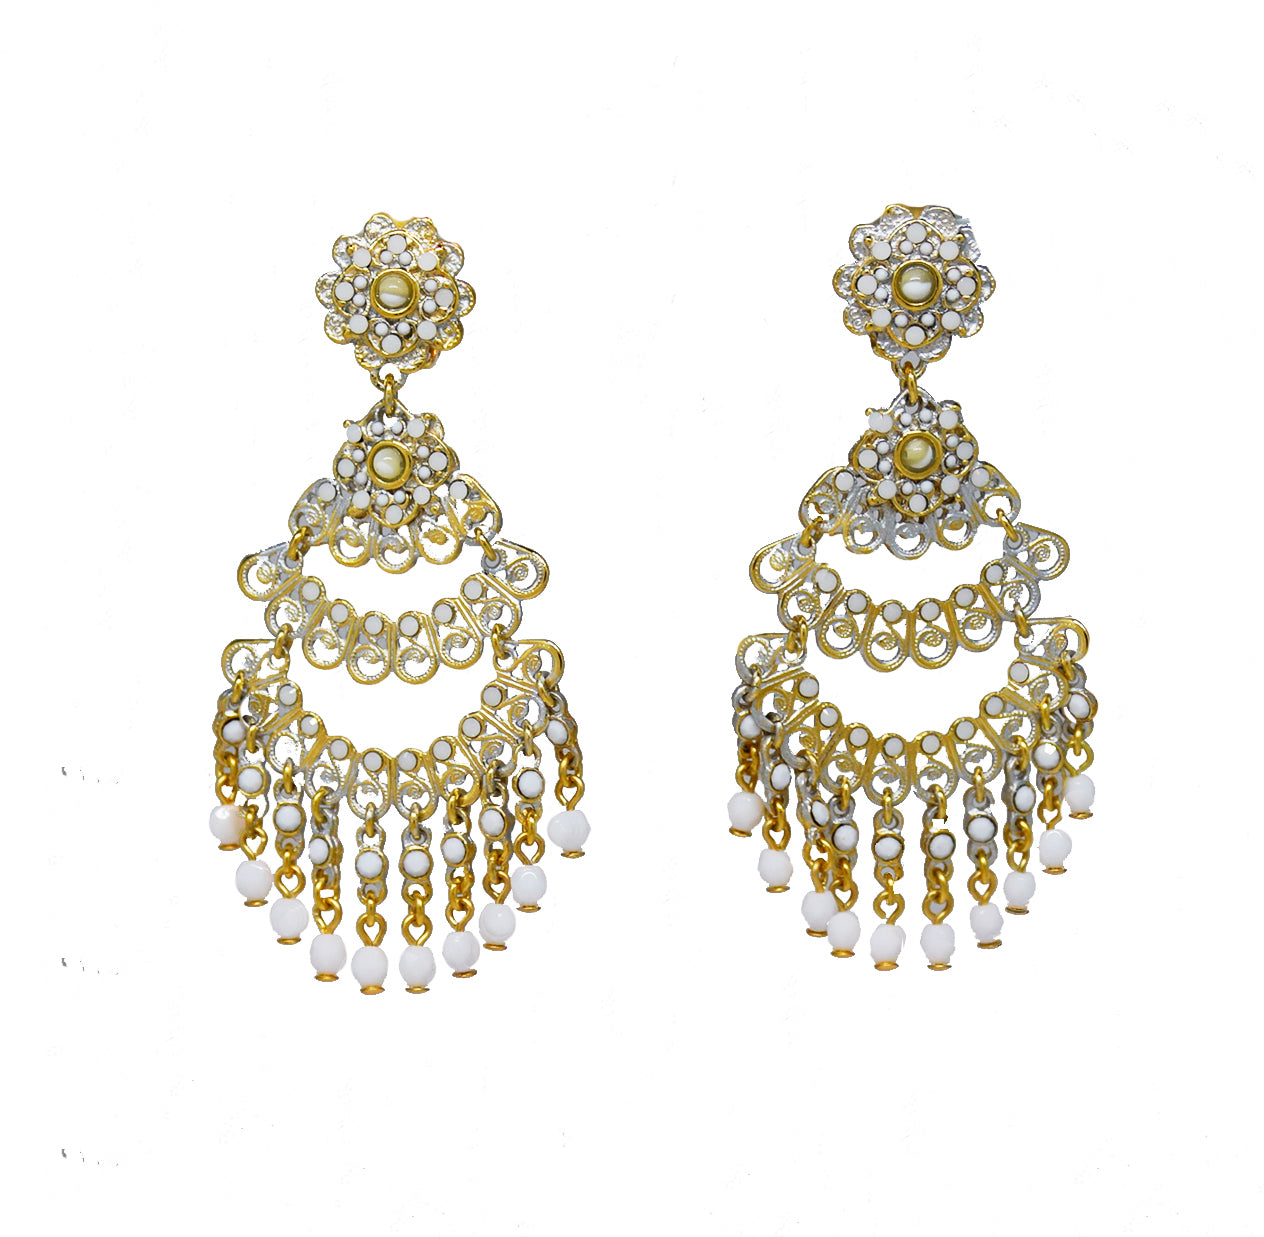 115  Gold filigree chandelier clip earring with white drops